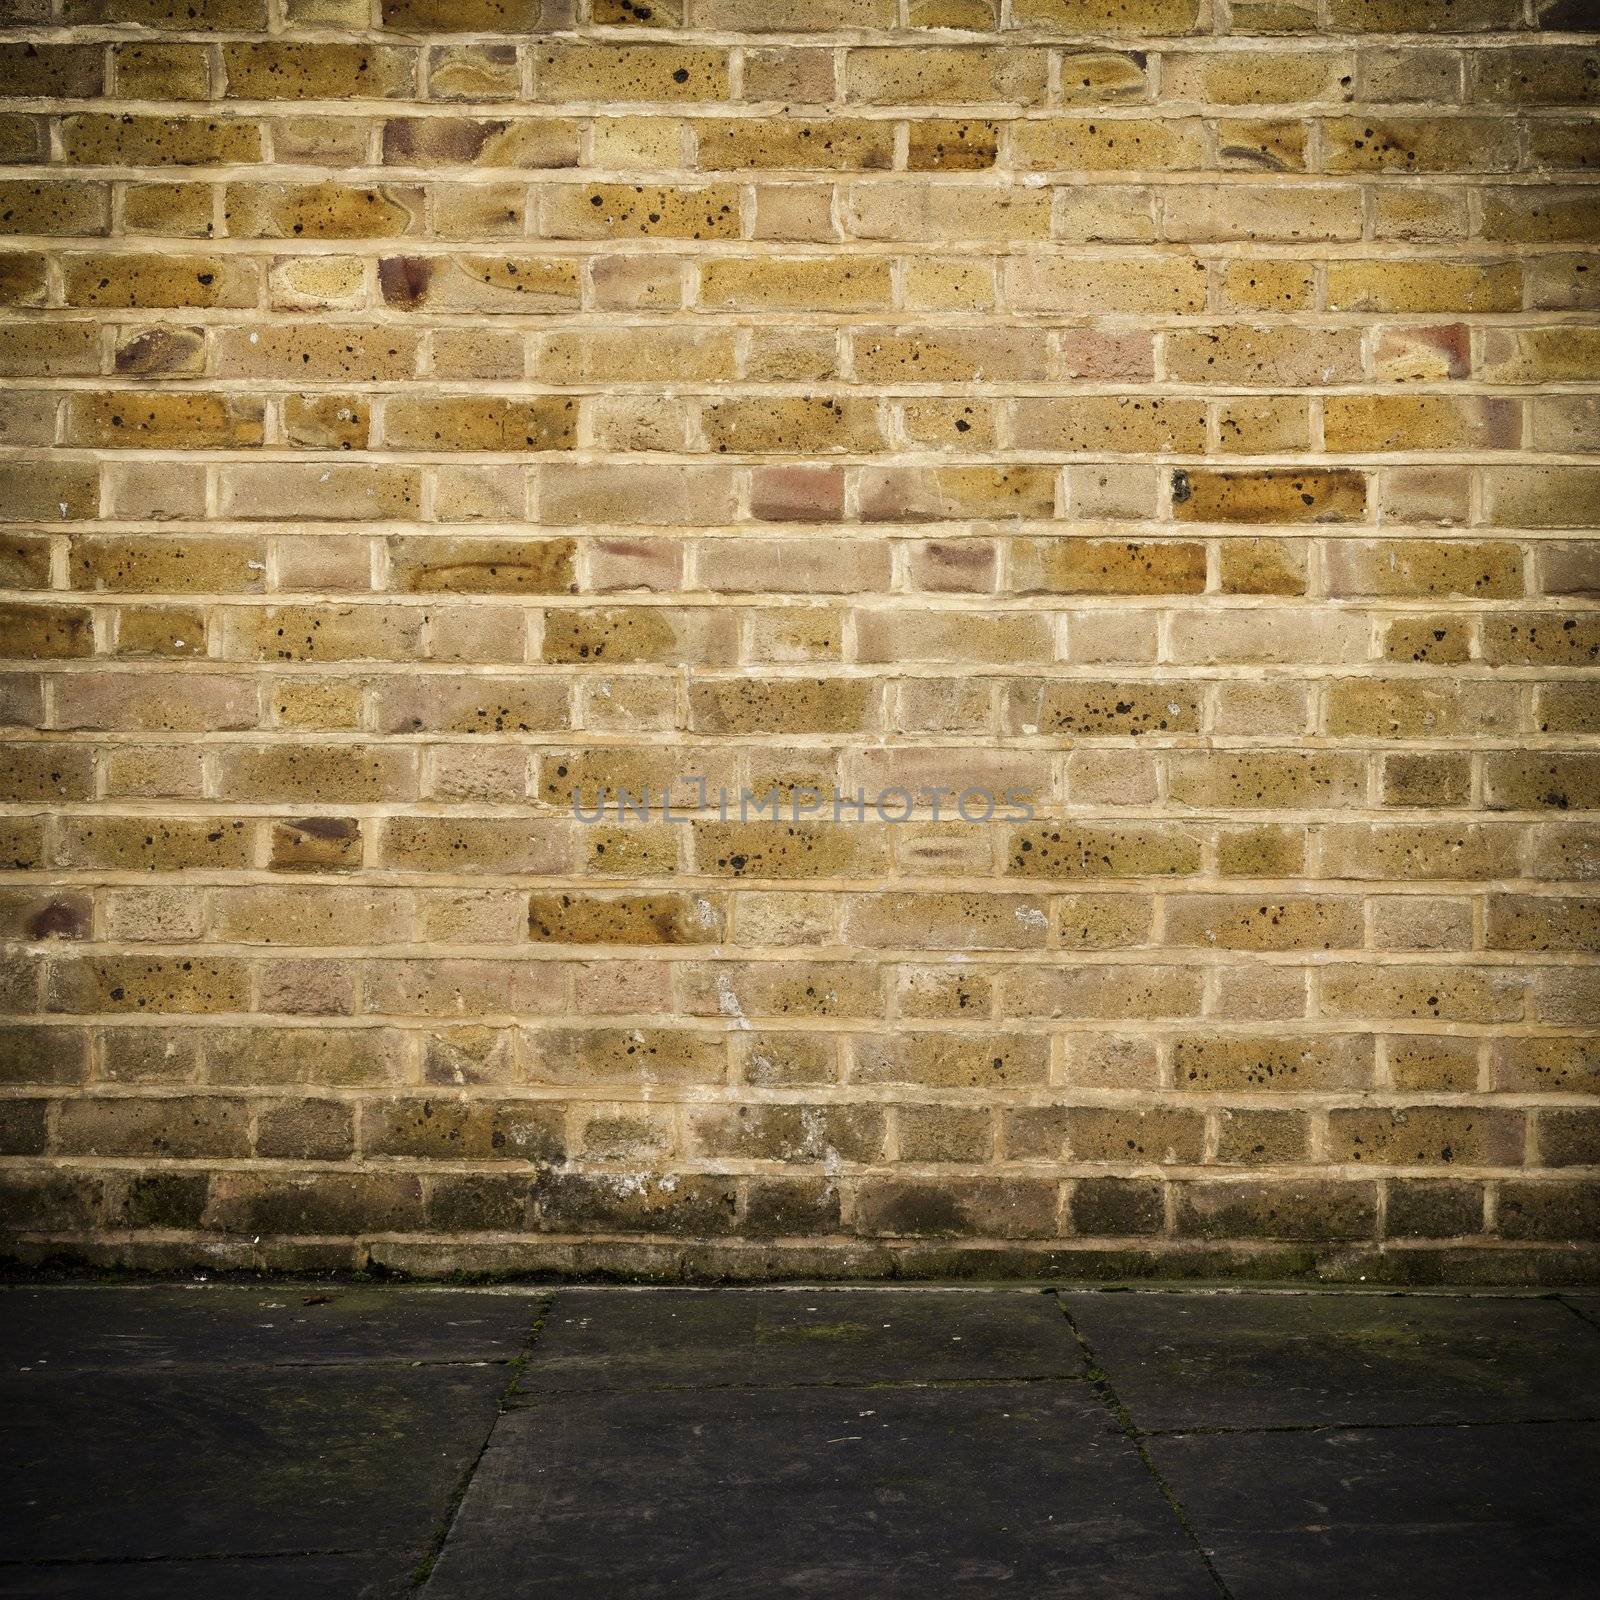 Old brick wall and dark stone floor, square photograph with vignette